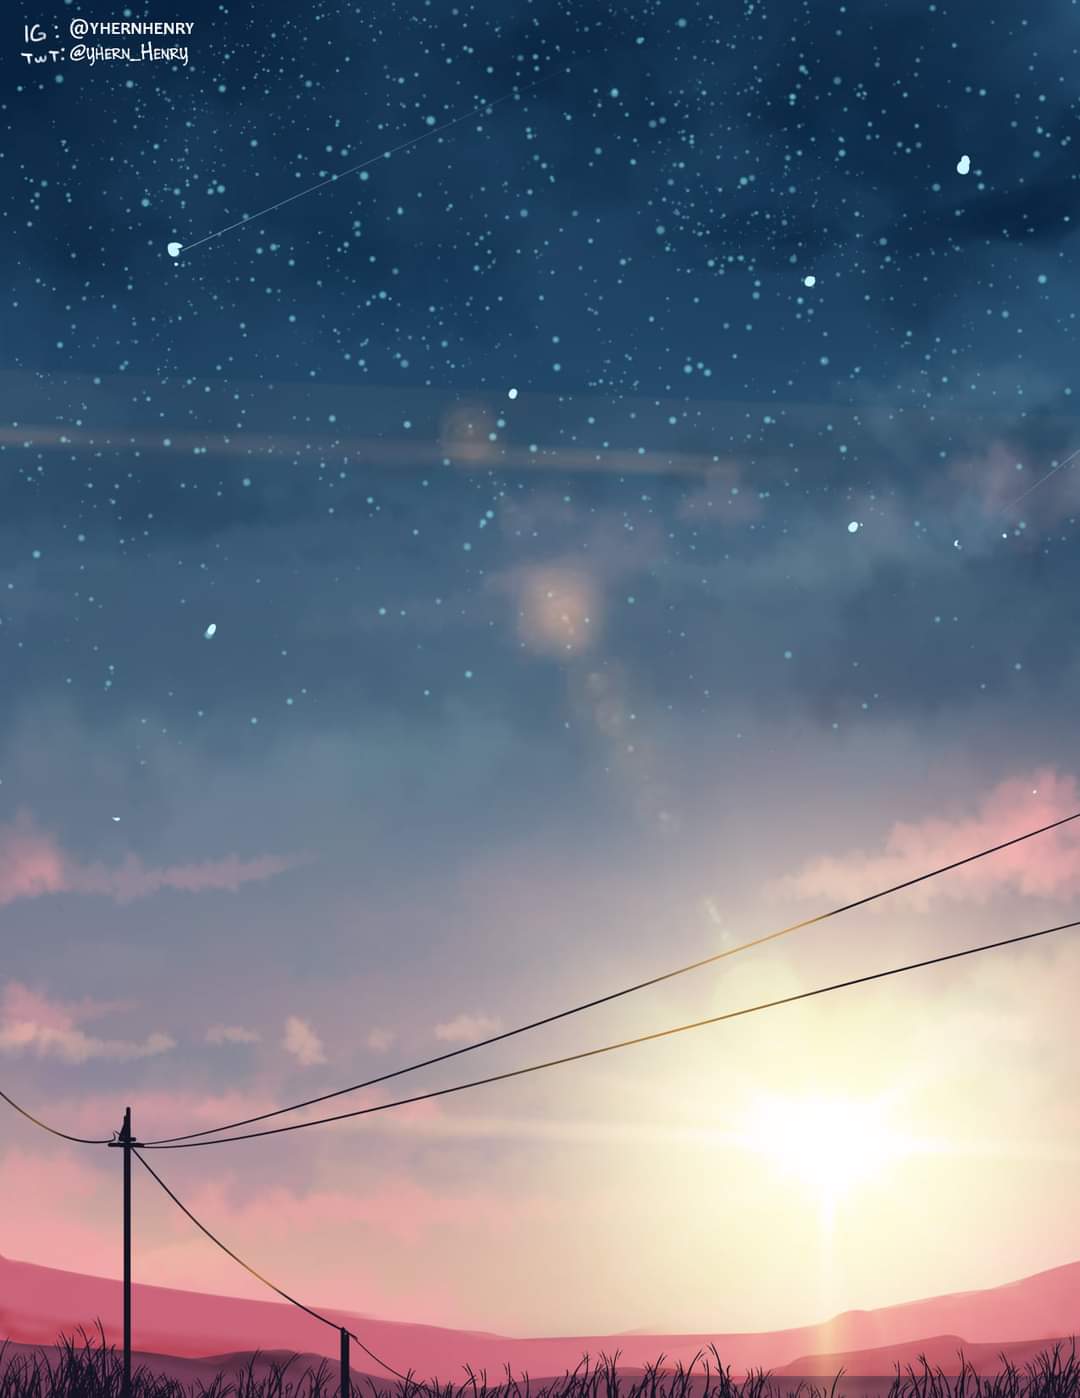 A sunset with stars in the sky - Anime sunset